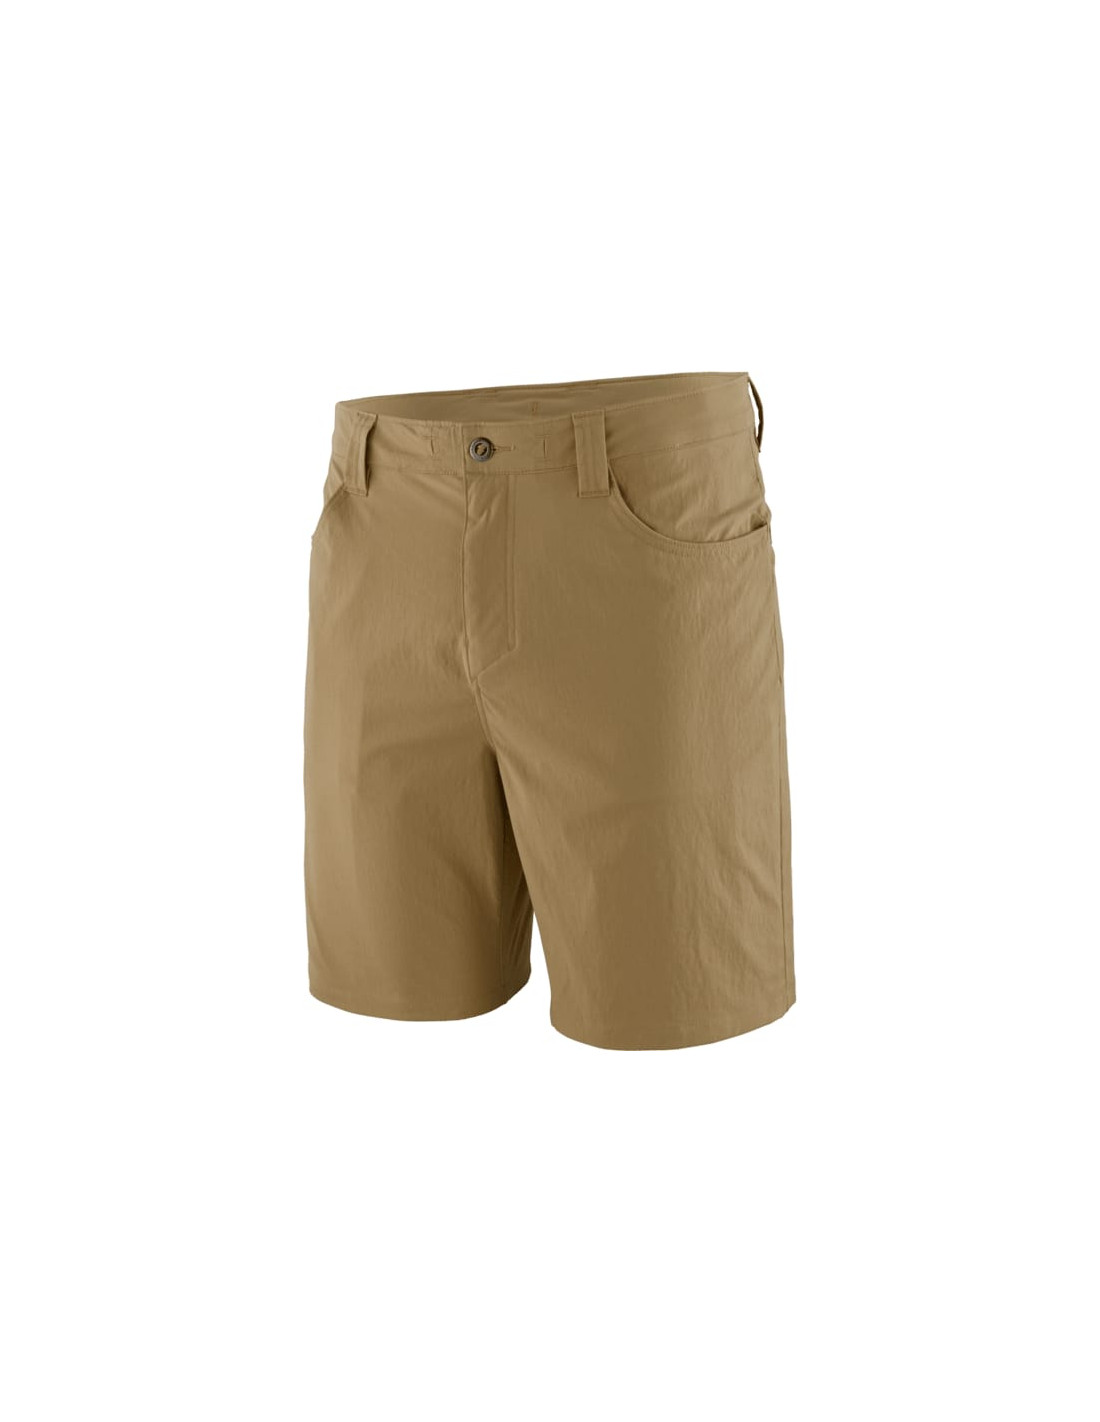 M'S QUANDARY SHORTS - 10 IN.